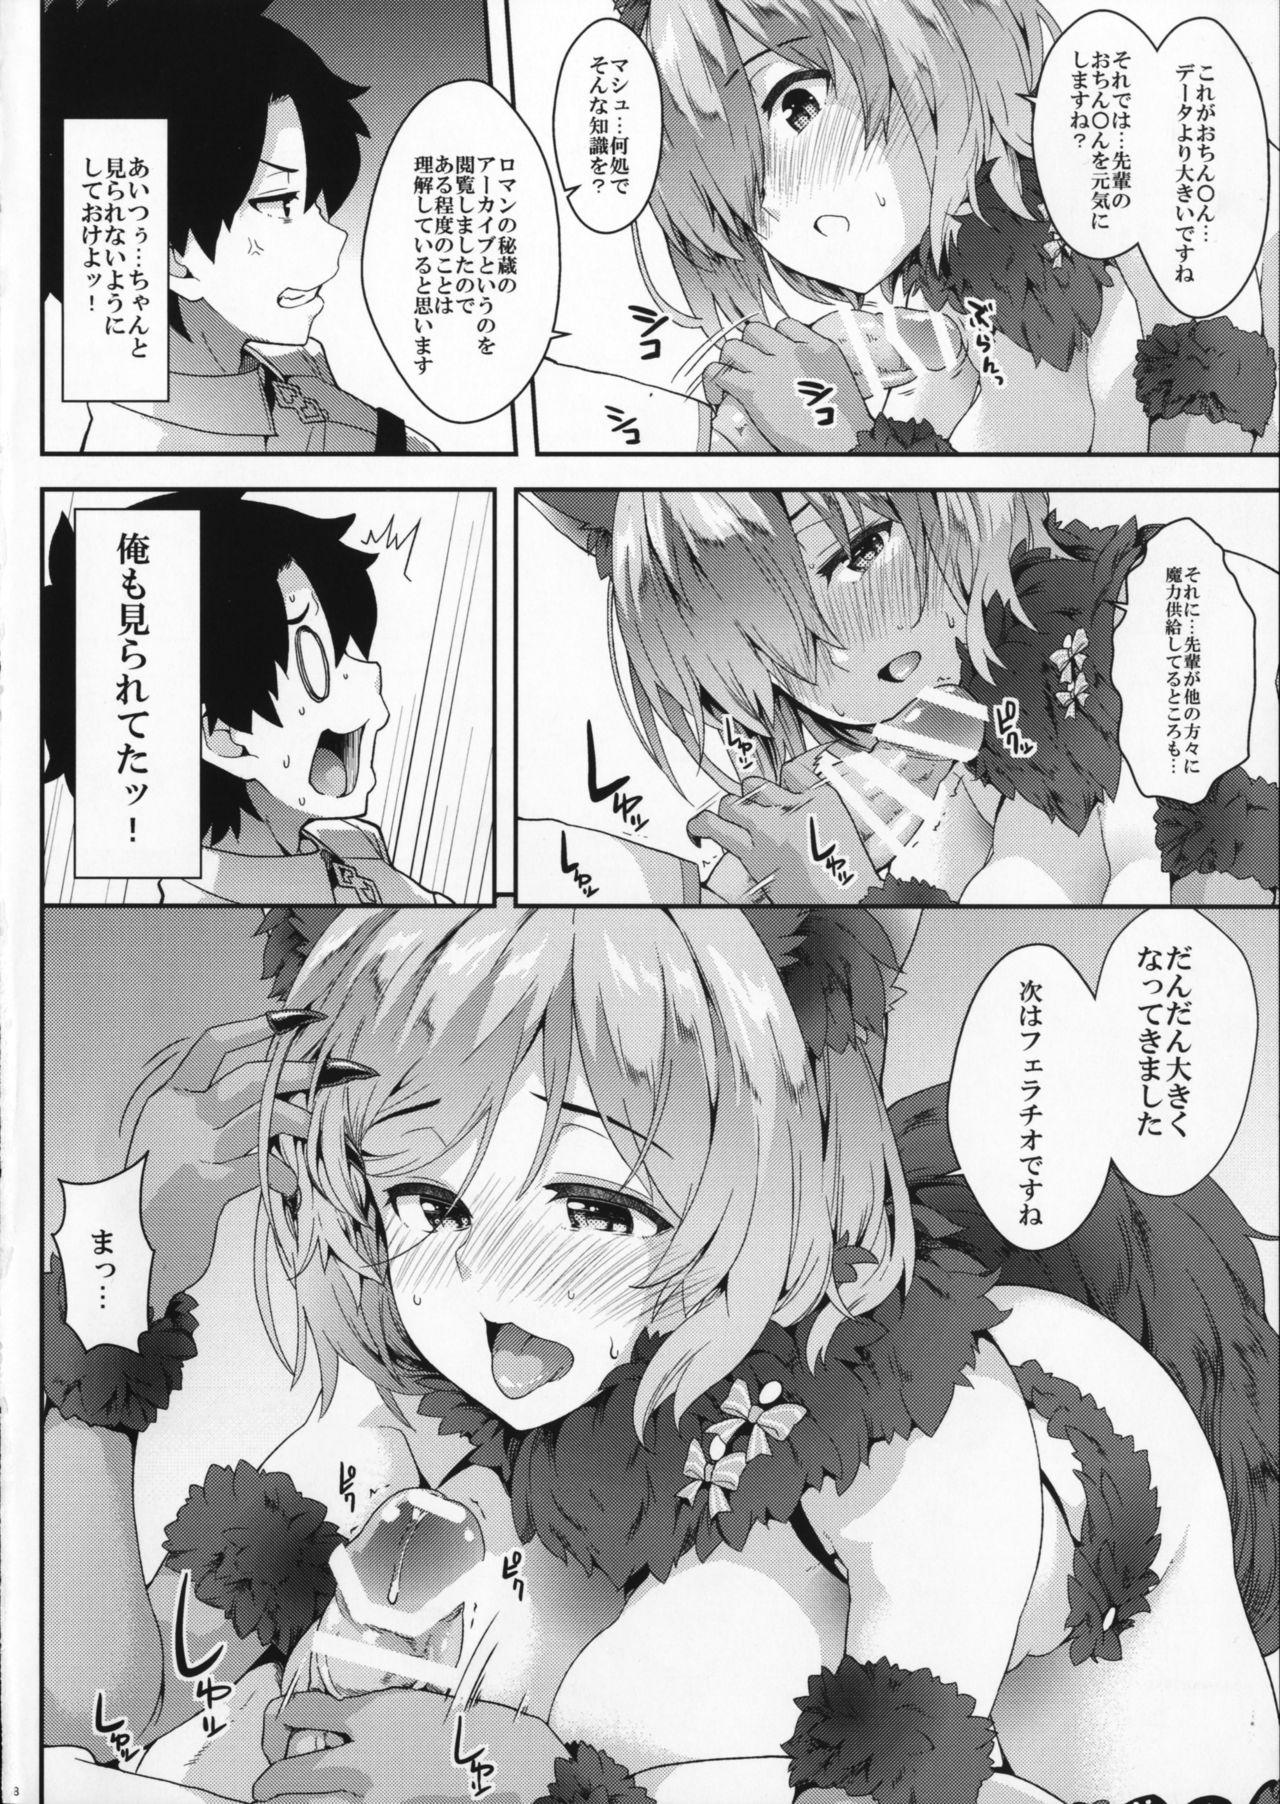 Asslick Why am I jealous of you? - Fate grand order Fake Tits - Page 7